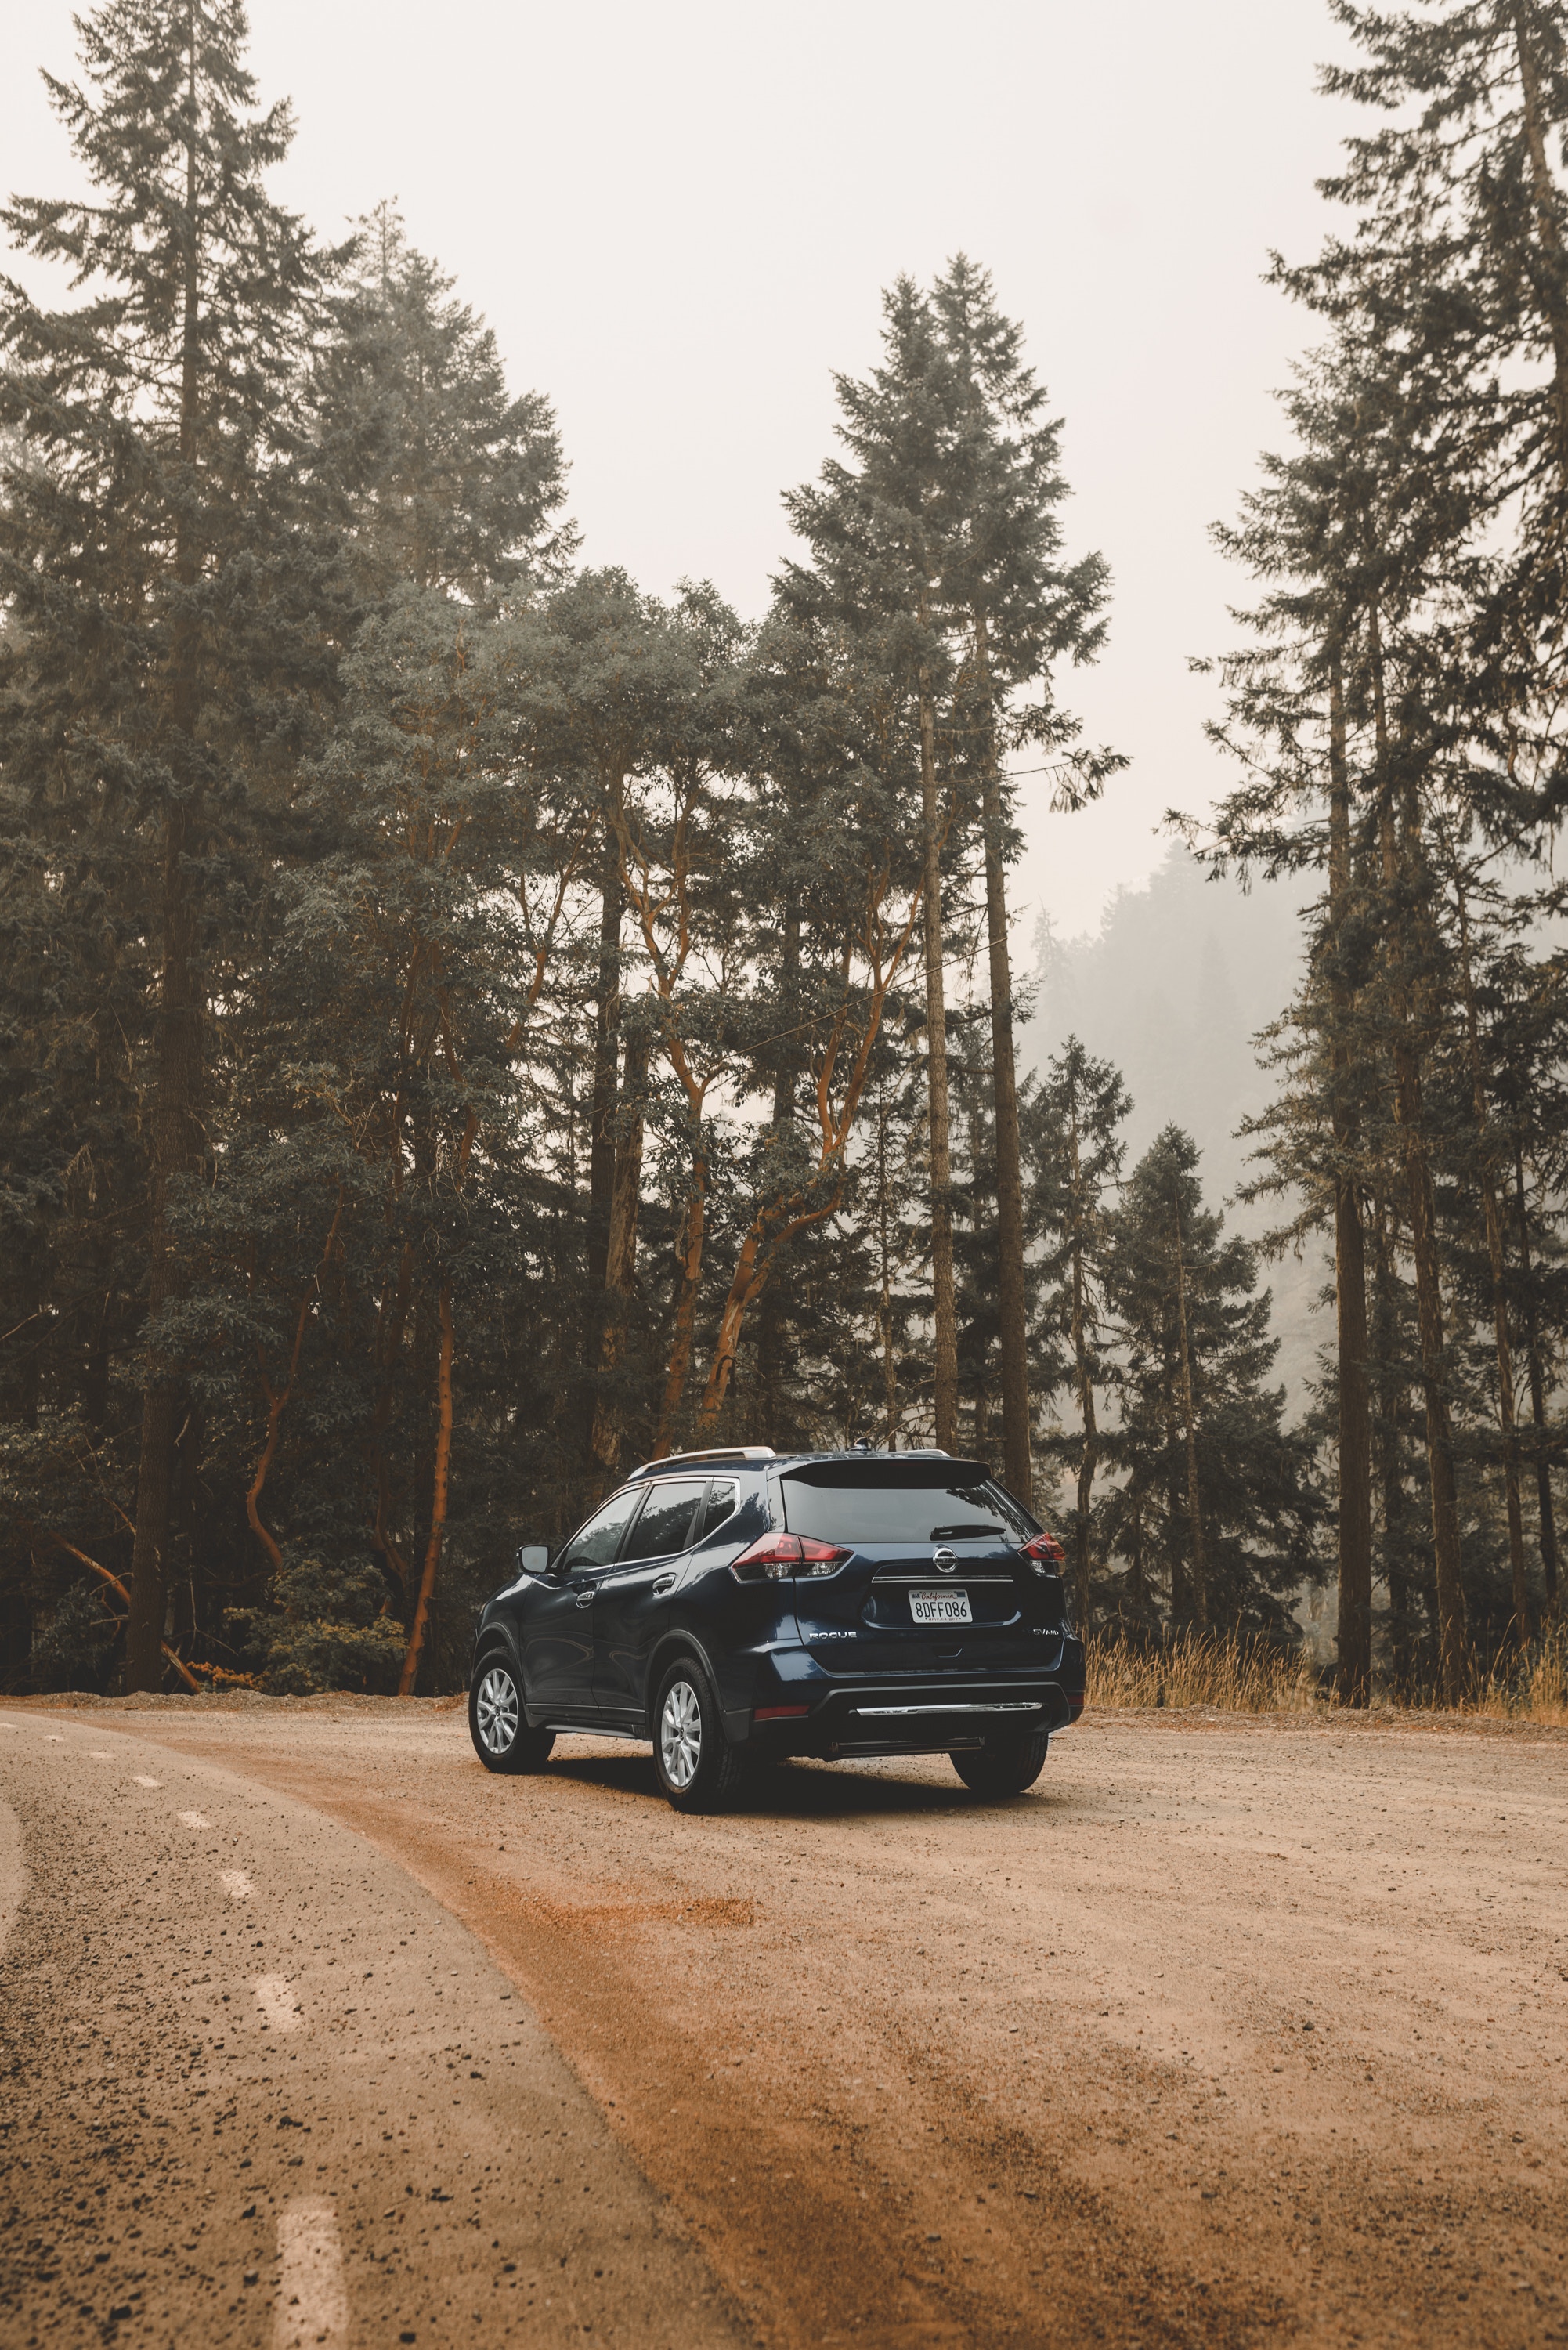 nissan rogue, trees, nissan, cars, crossover, trip